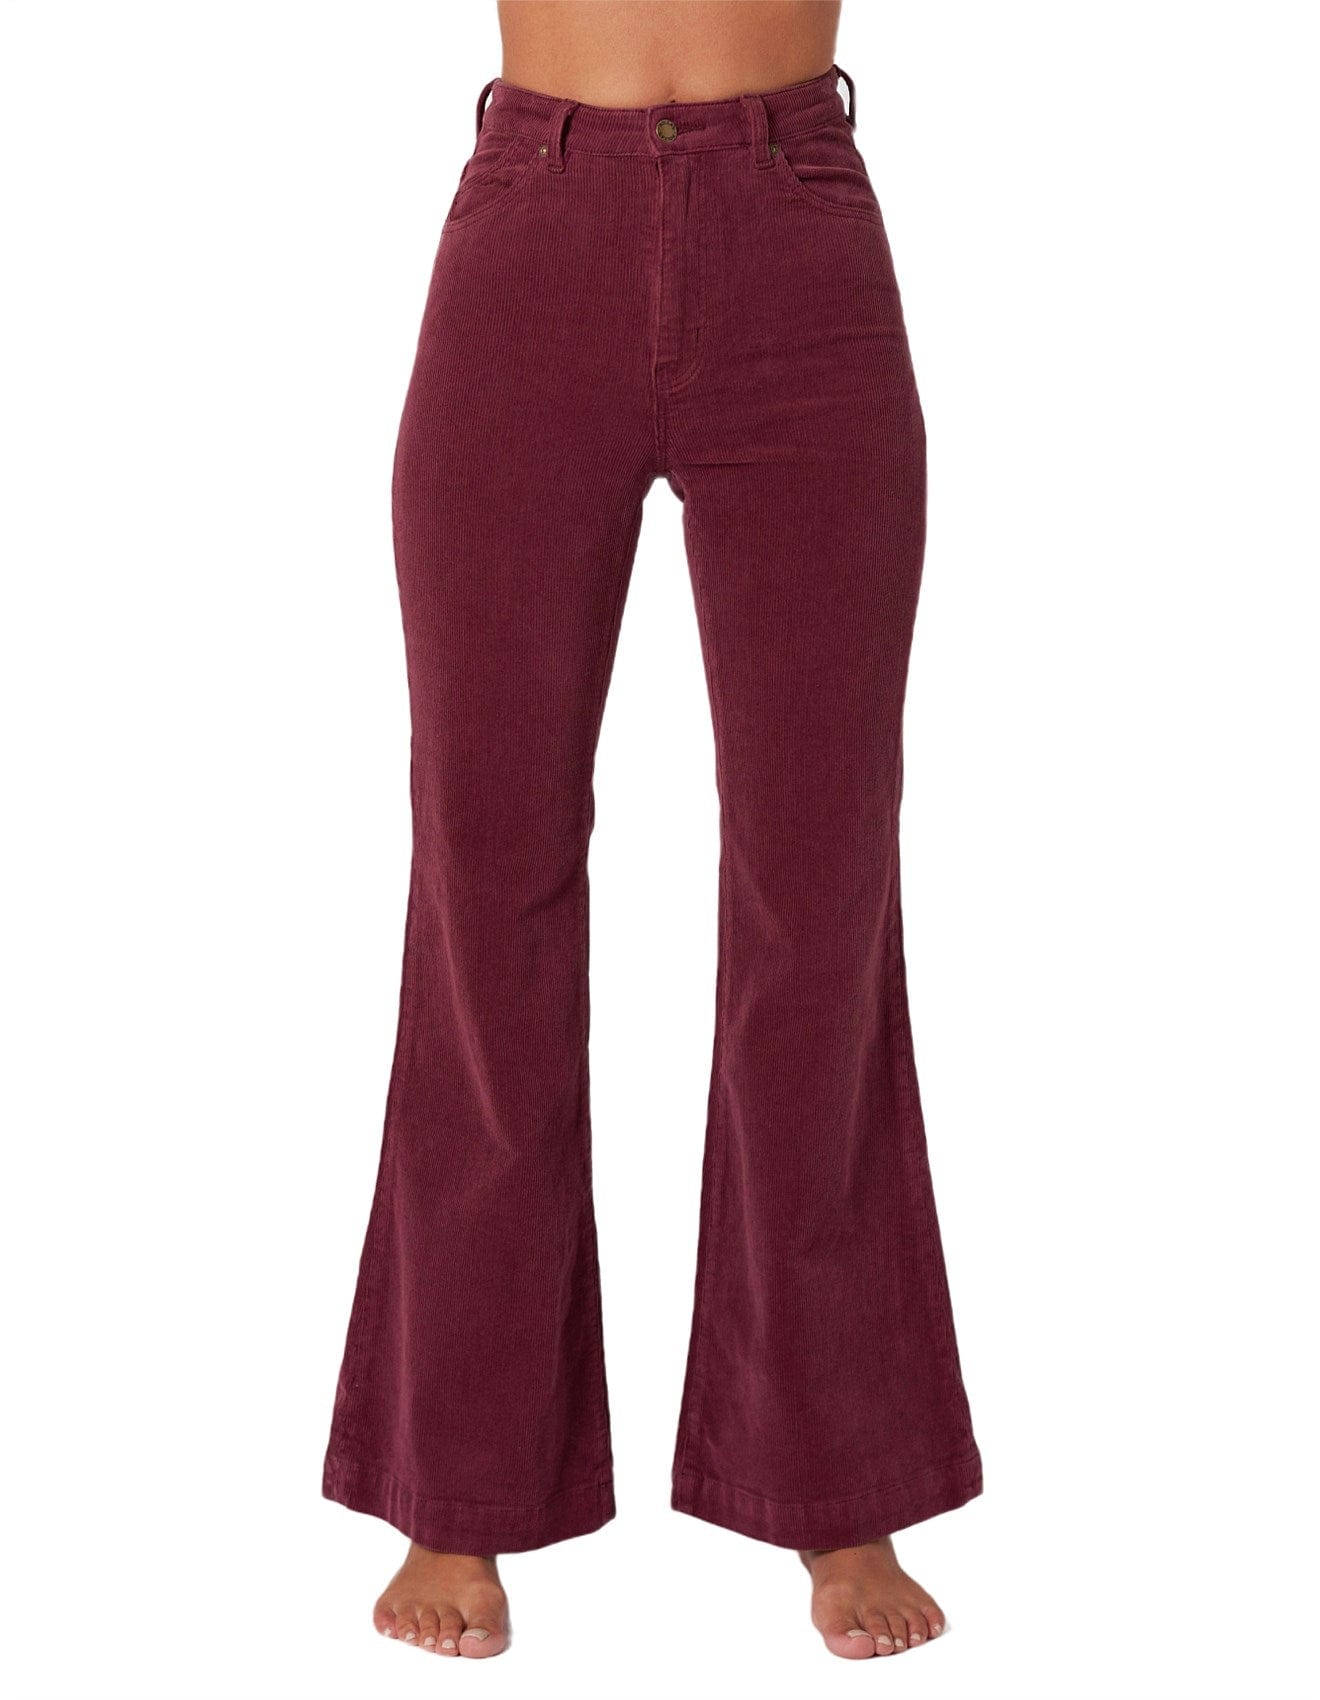 ROLLAS JEANS FLARES Eastcoast Flare Mulberry Cord